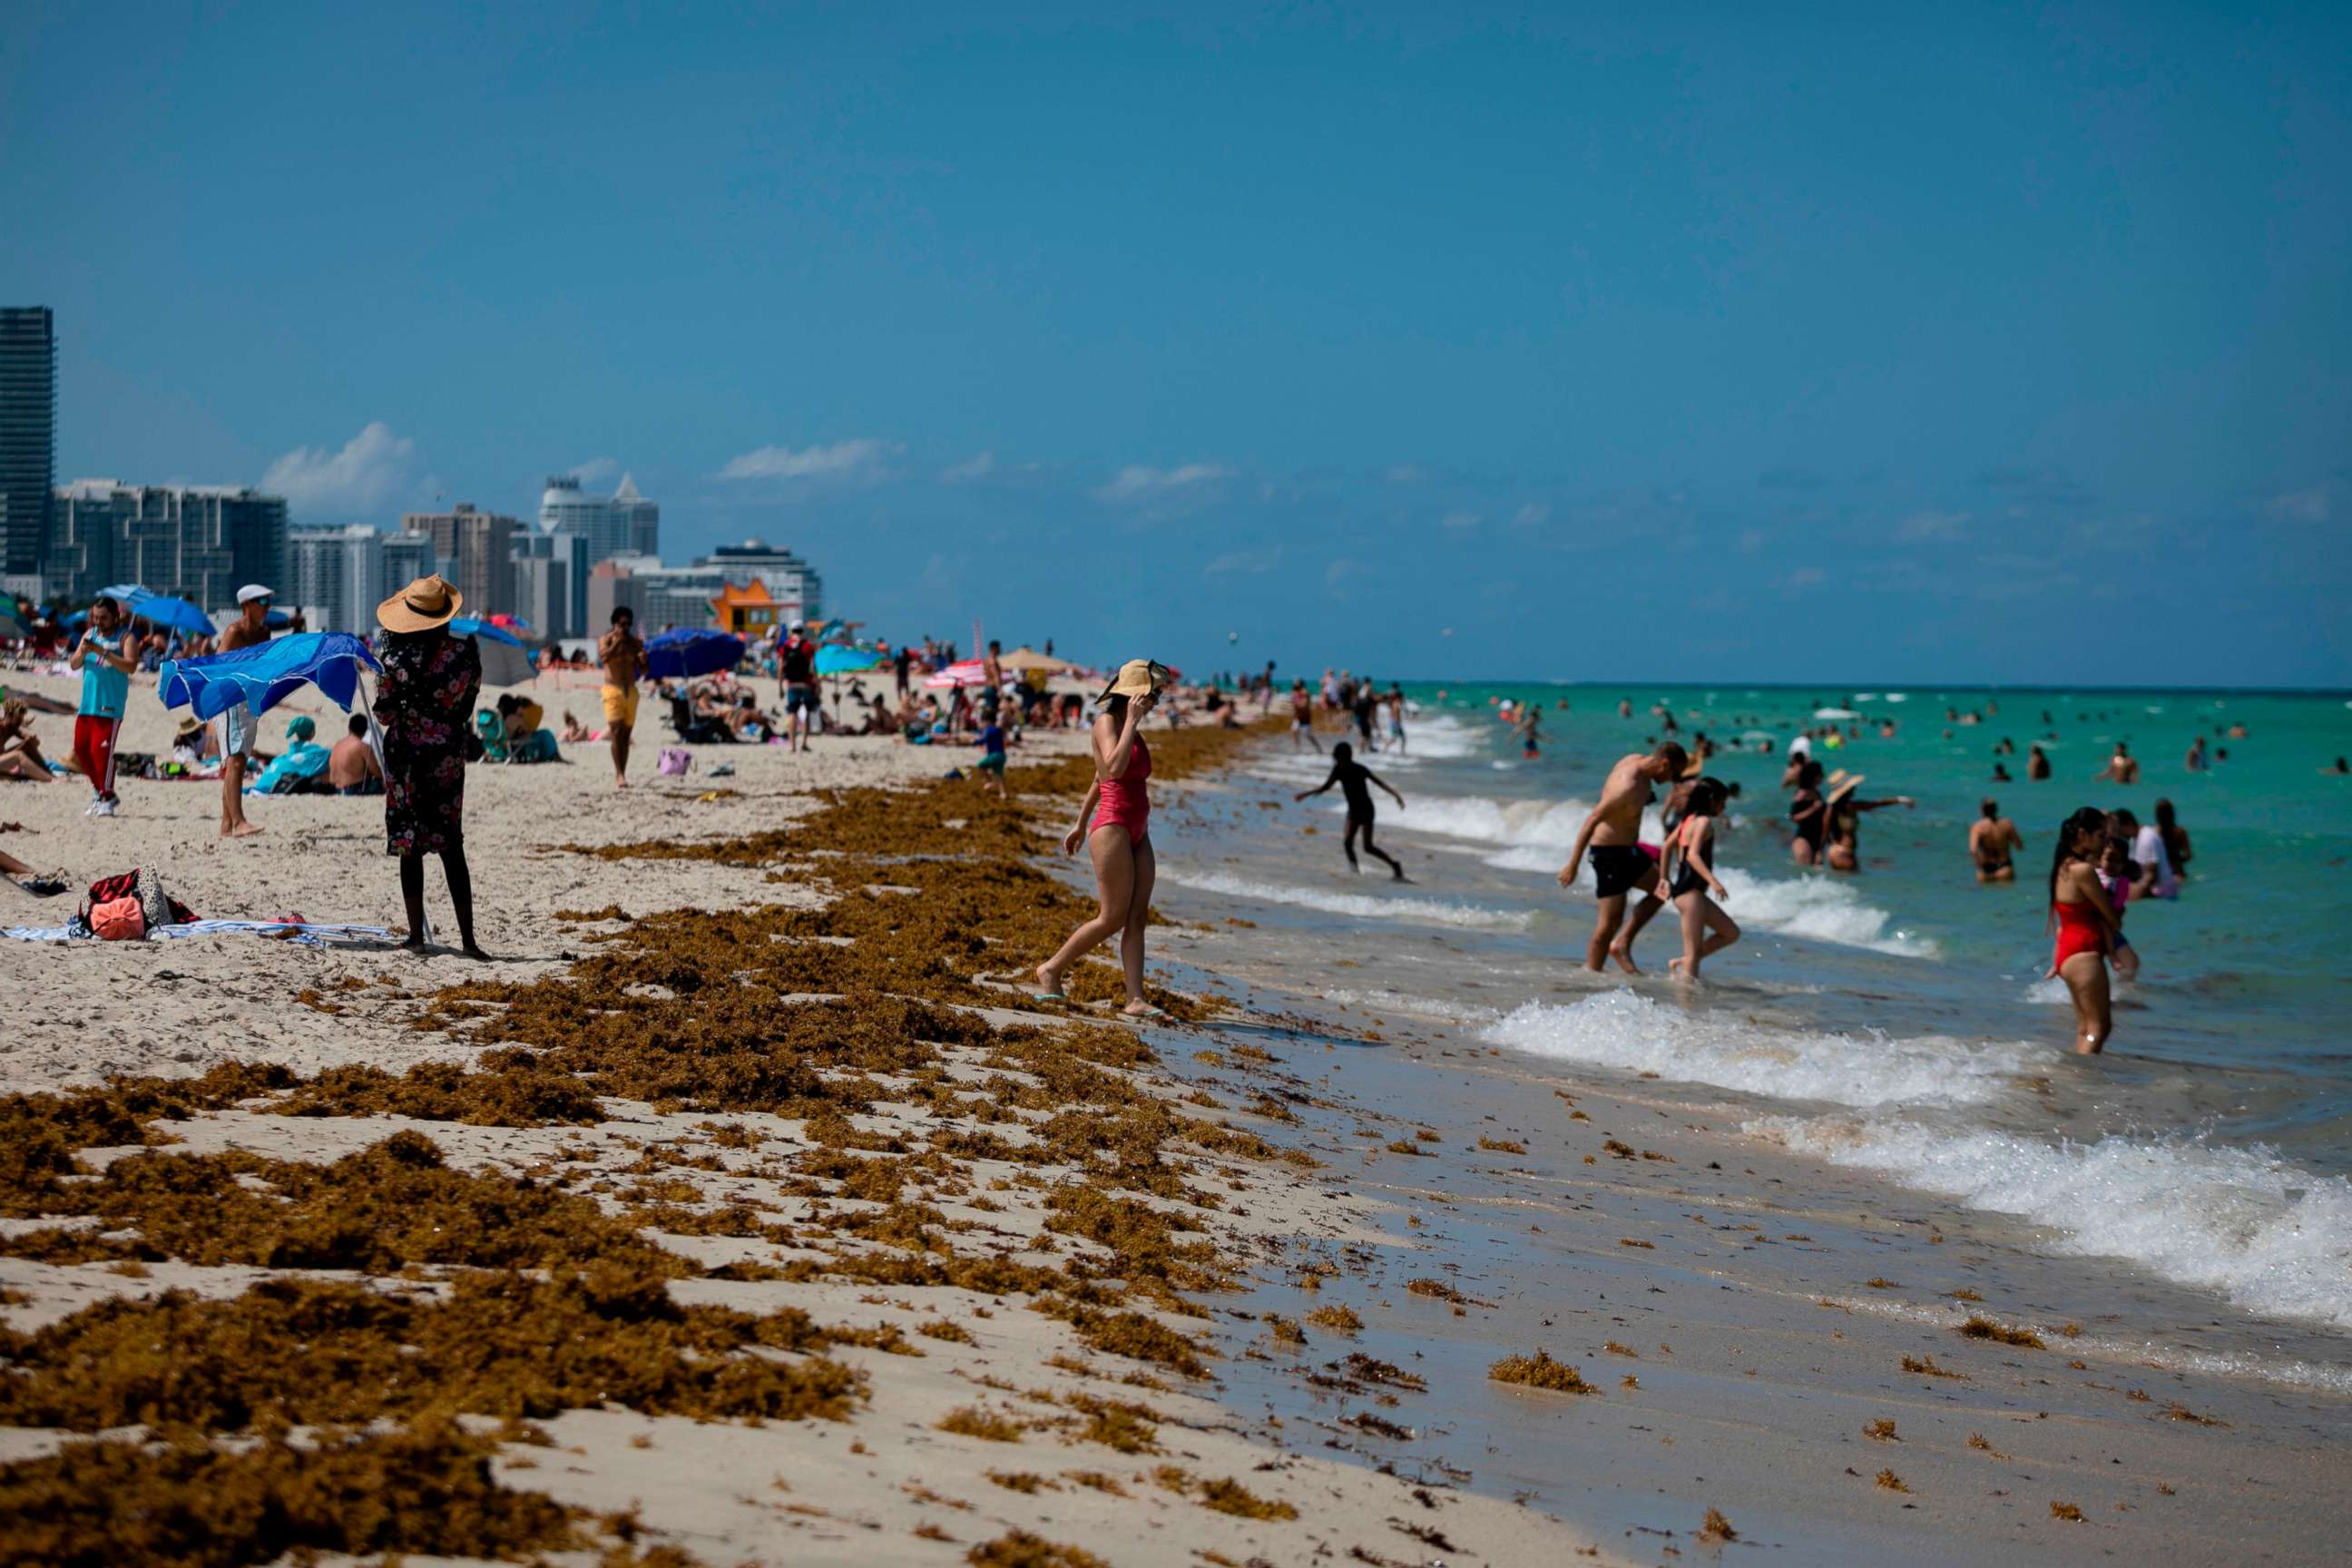 PHOTO: People gather on the beach in Miami Beach, Florida on June 16, 2020. - Florida is reporting record daily totals of new coronavirus cases, but you'd never know it looking at the Sunshine State's increasingly busy beaches and hotels. 